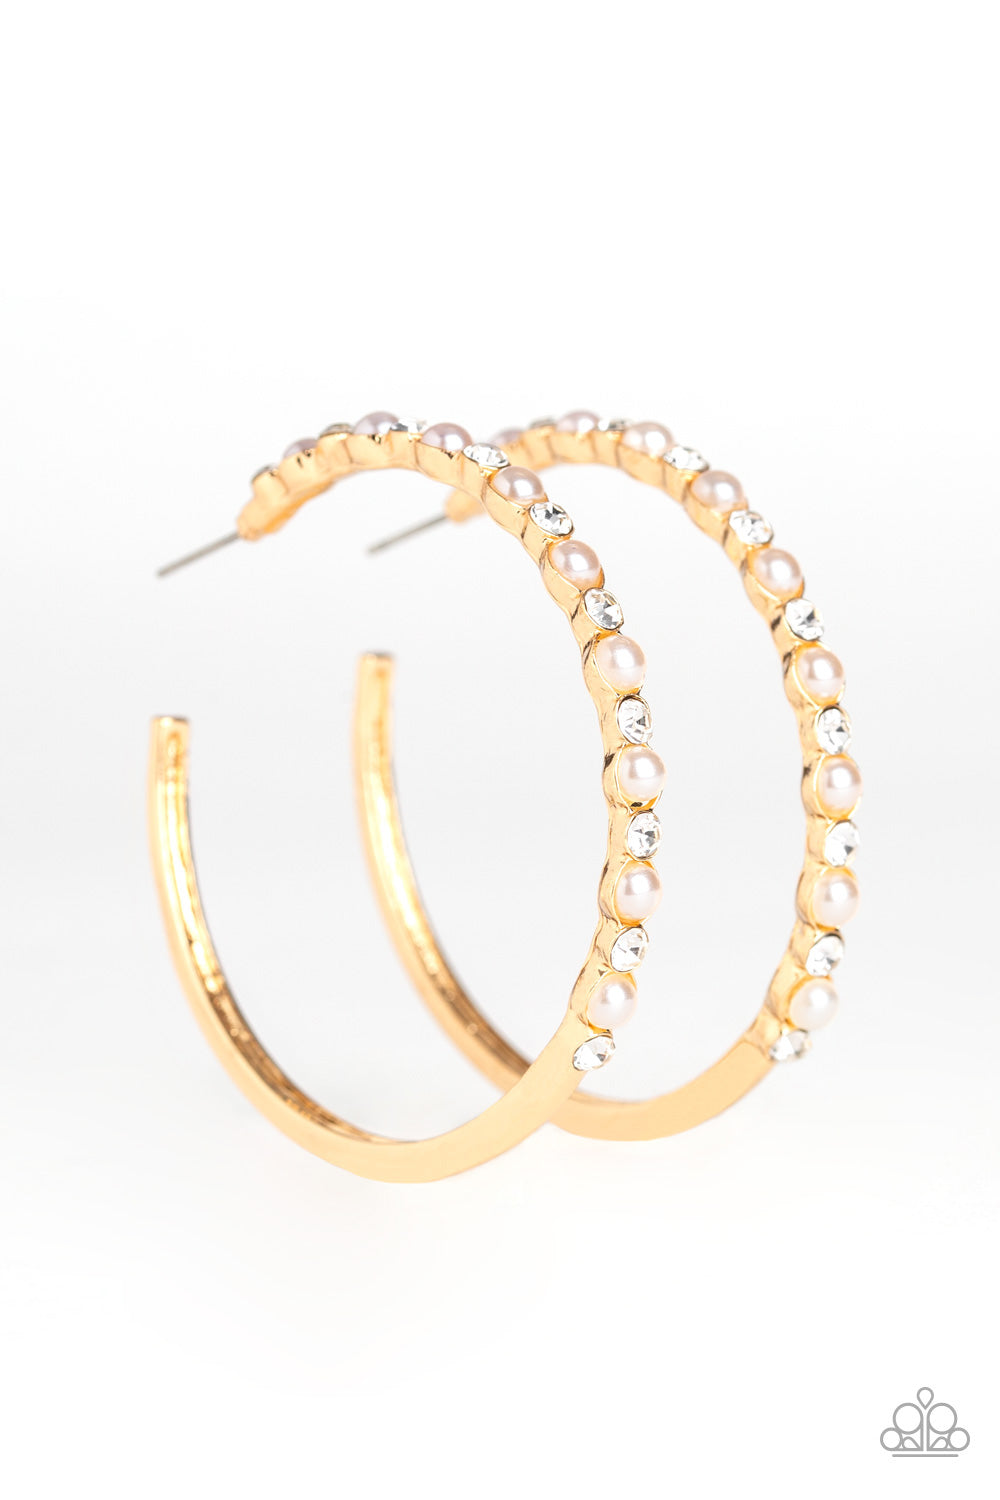 Paparazzi A Sweeping Success - Gold Hoop Earrings - A Finishing Touch 